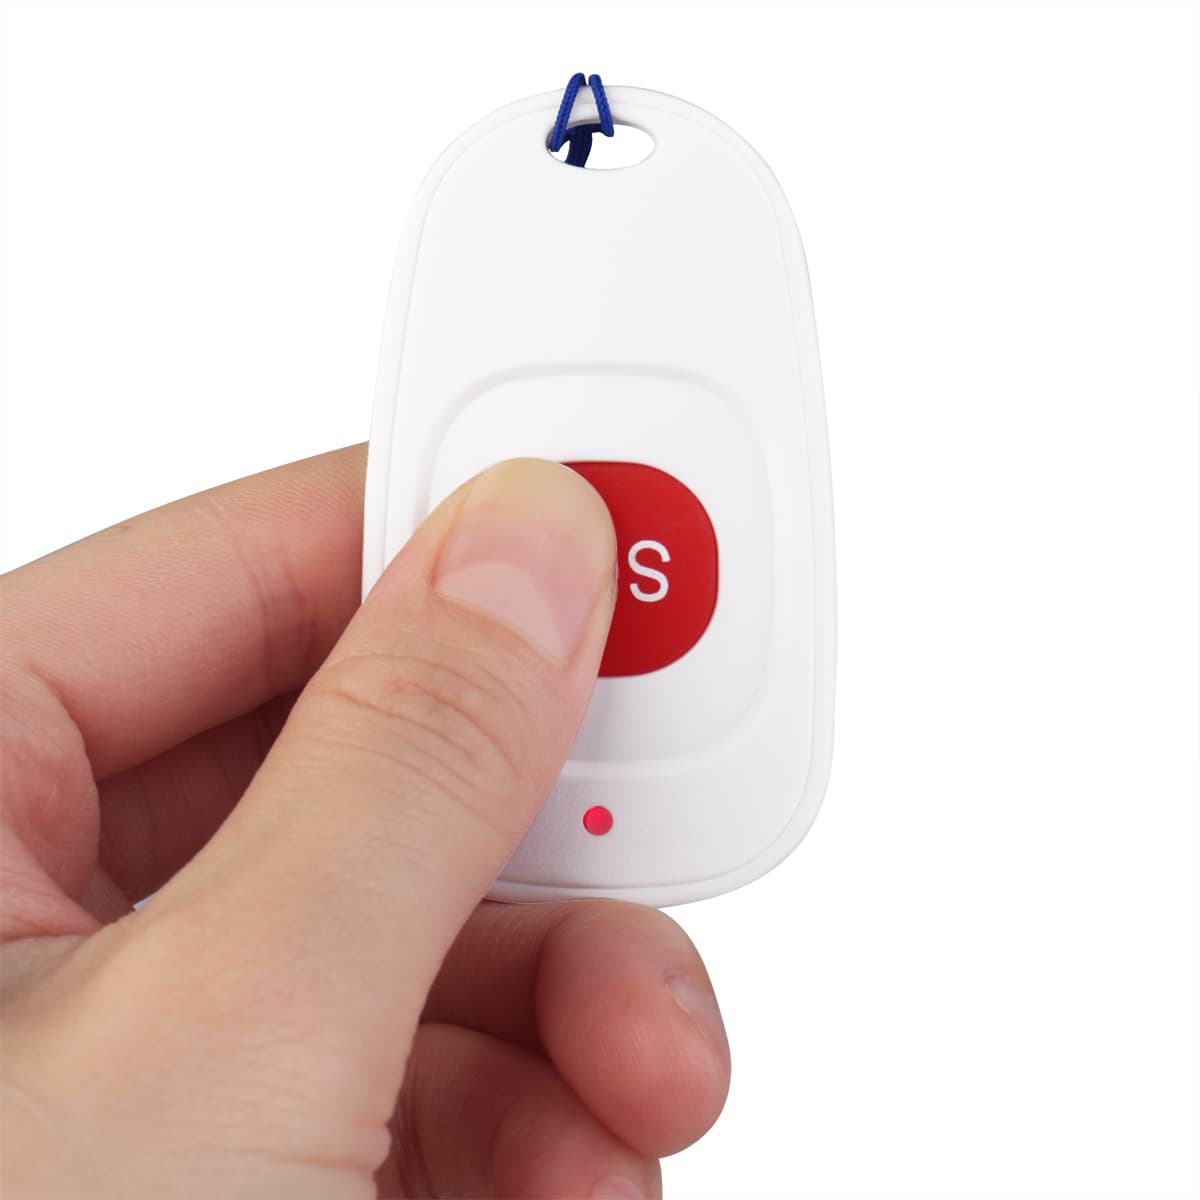 Retekess TH101 Wireless Caregiver Pagers SOS Smart Call Button